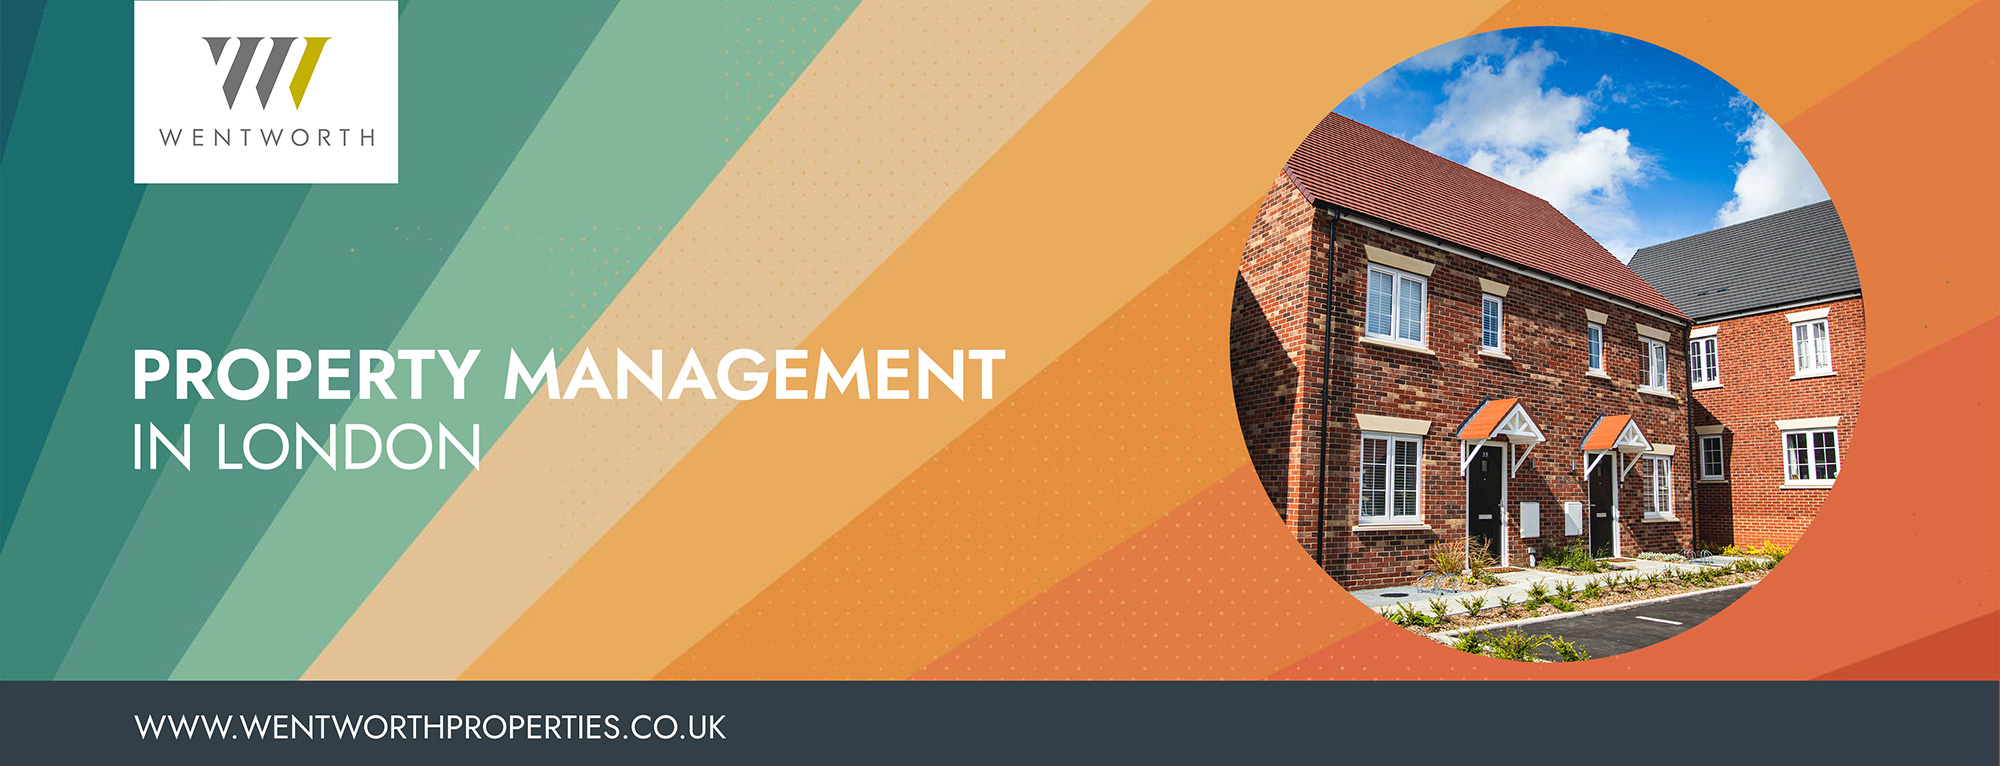 Property management in London